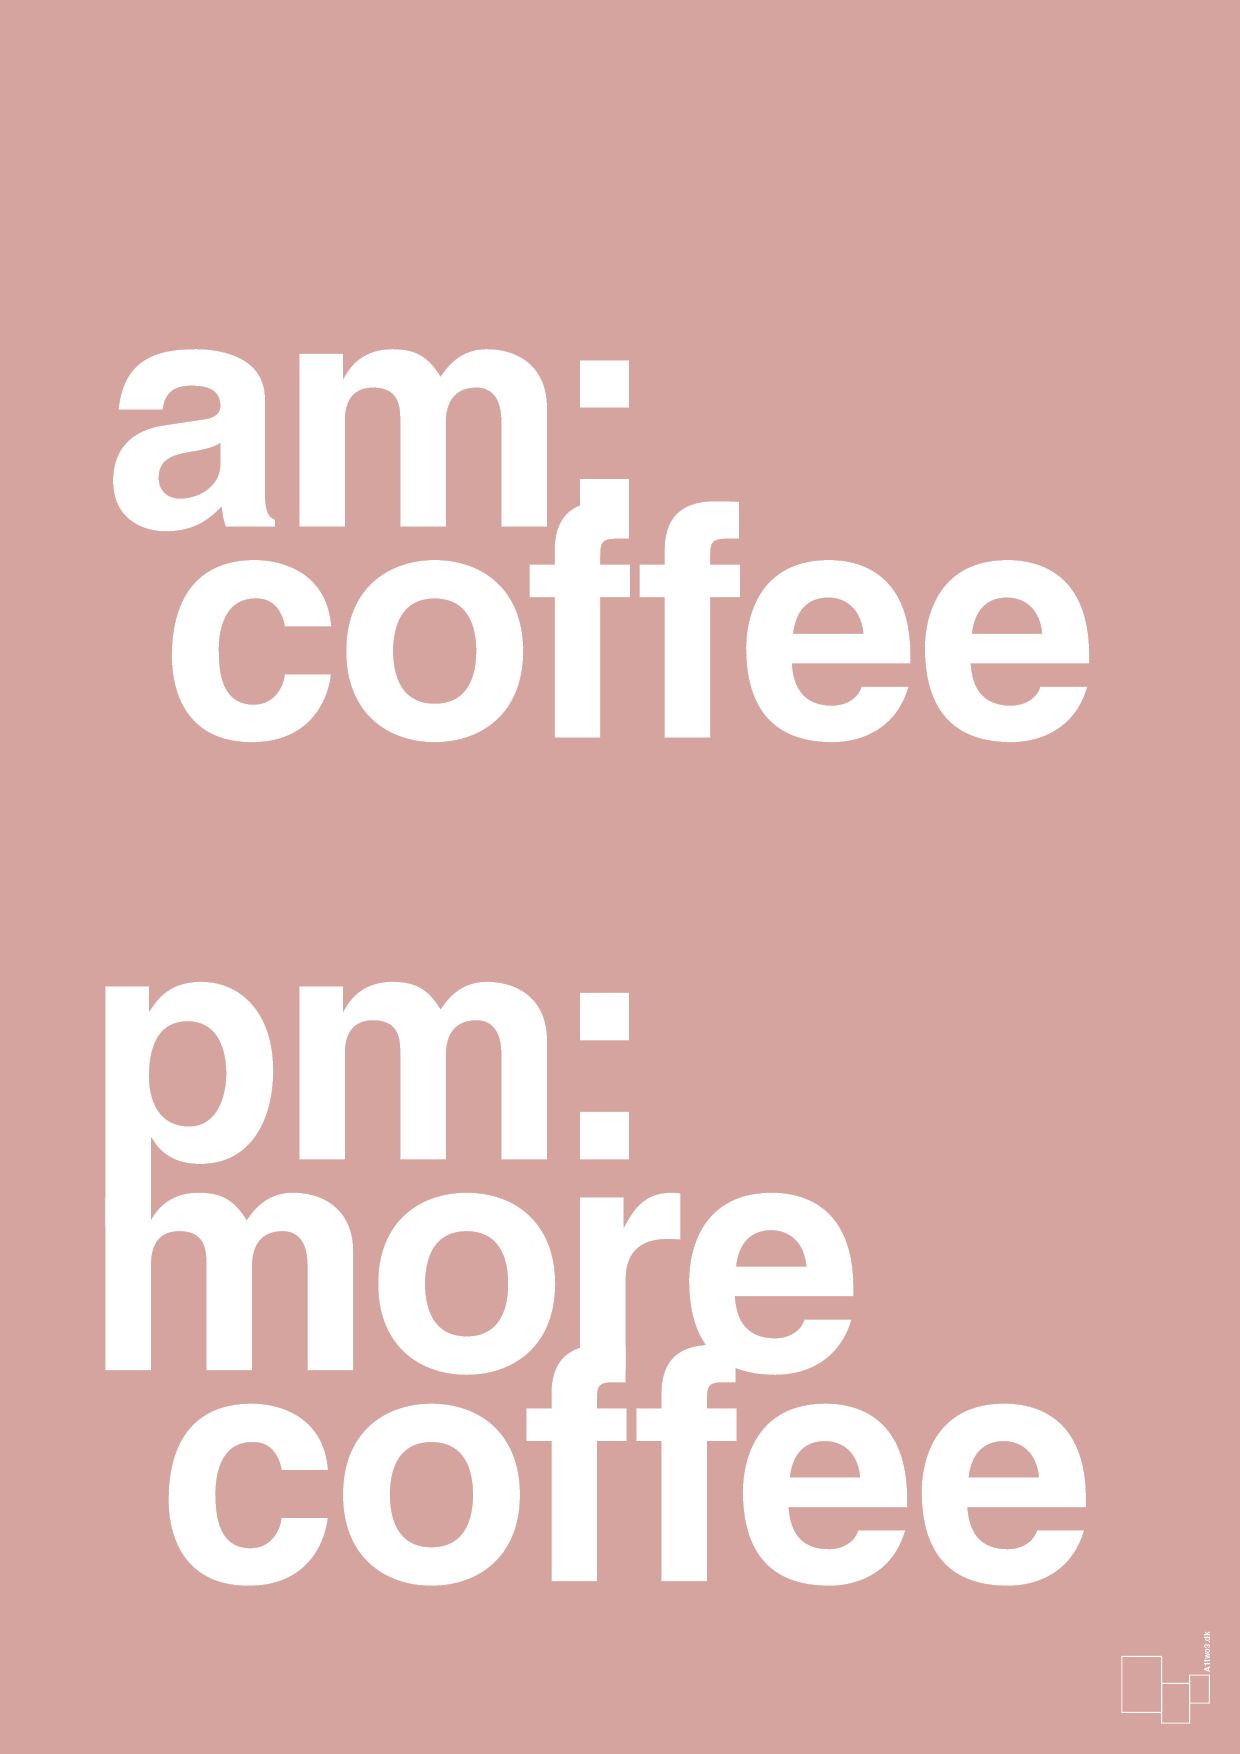 am coffee pm more coffee - Plakat med Ordsprog i Bubble Shell